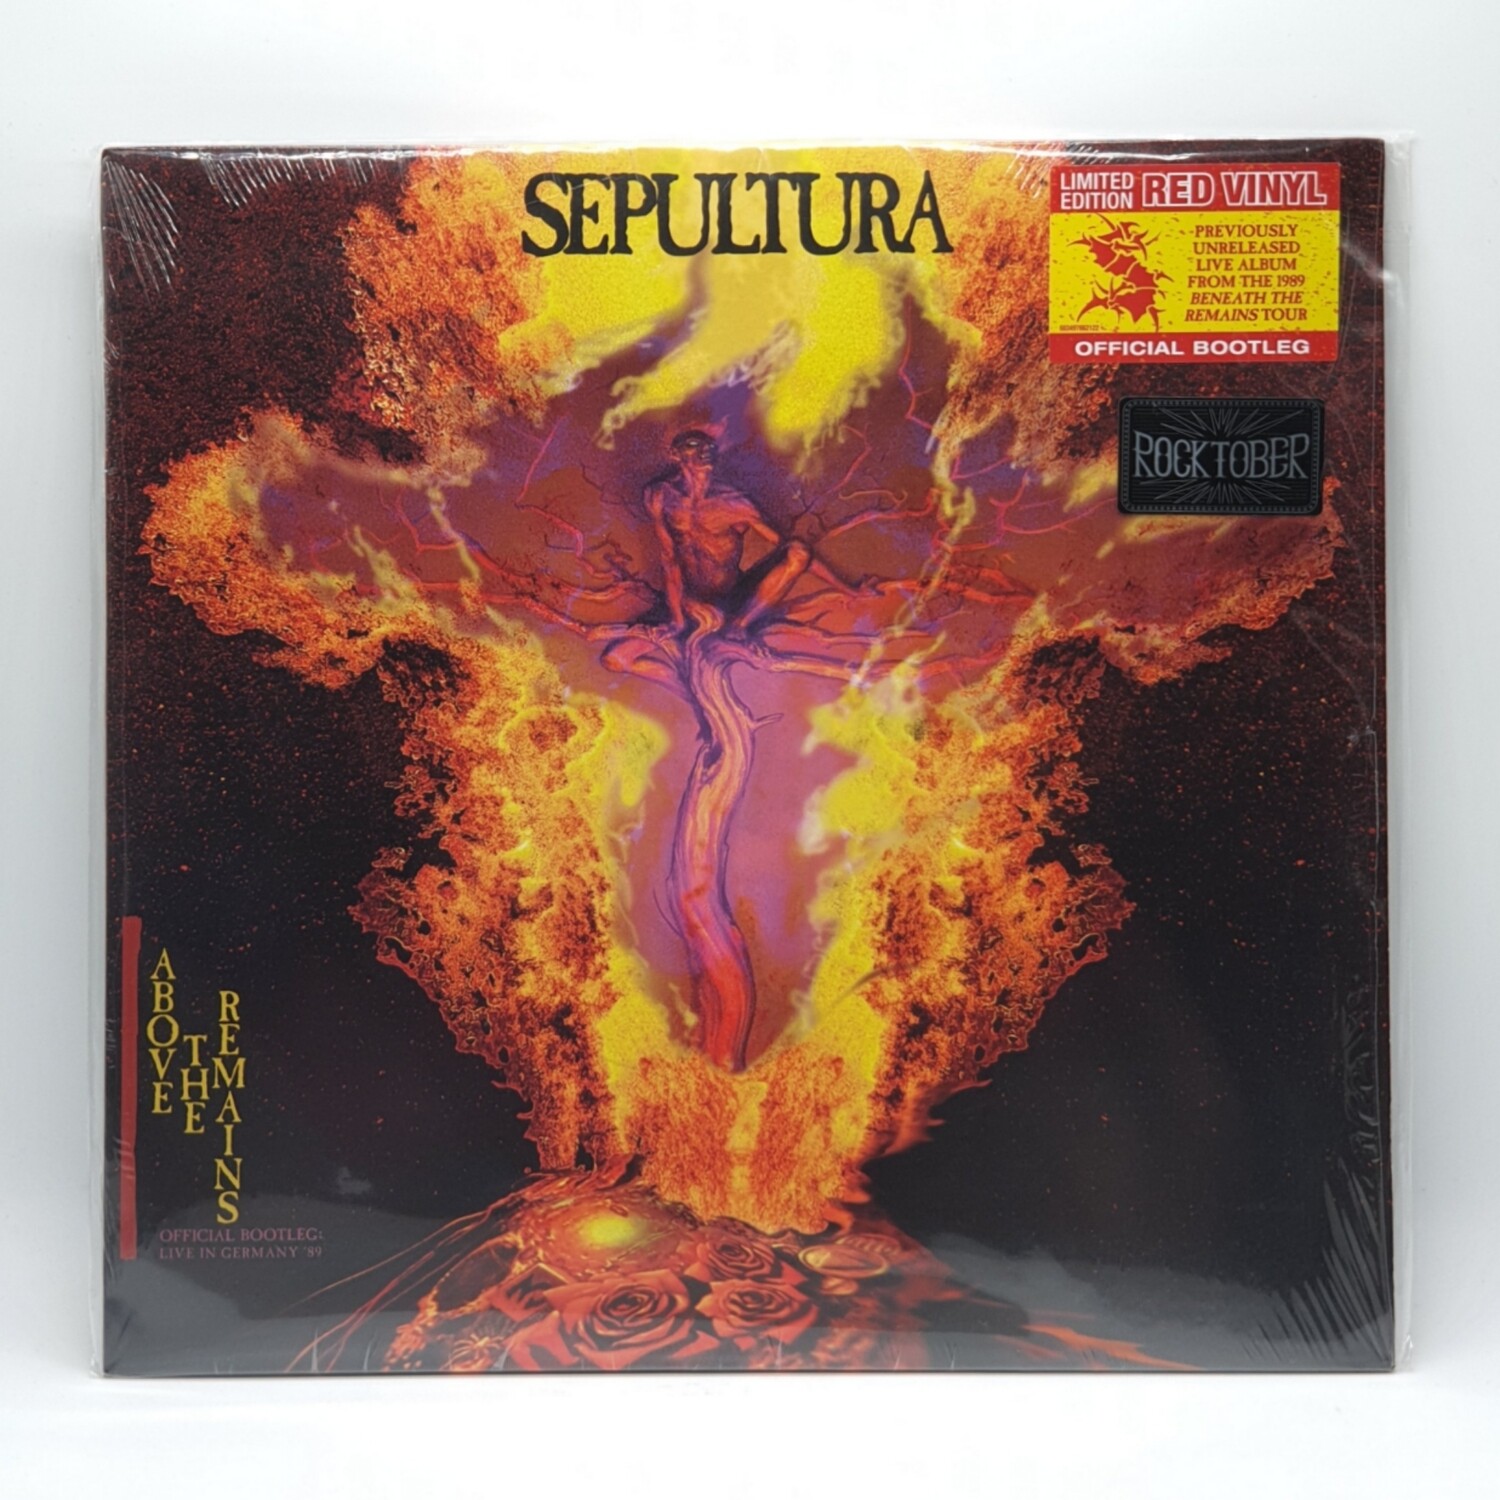 [USED] SEPULTURA -ABOVE THE REMAINS- LP (RED VINYL)